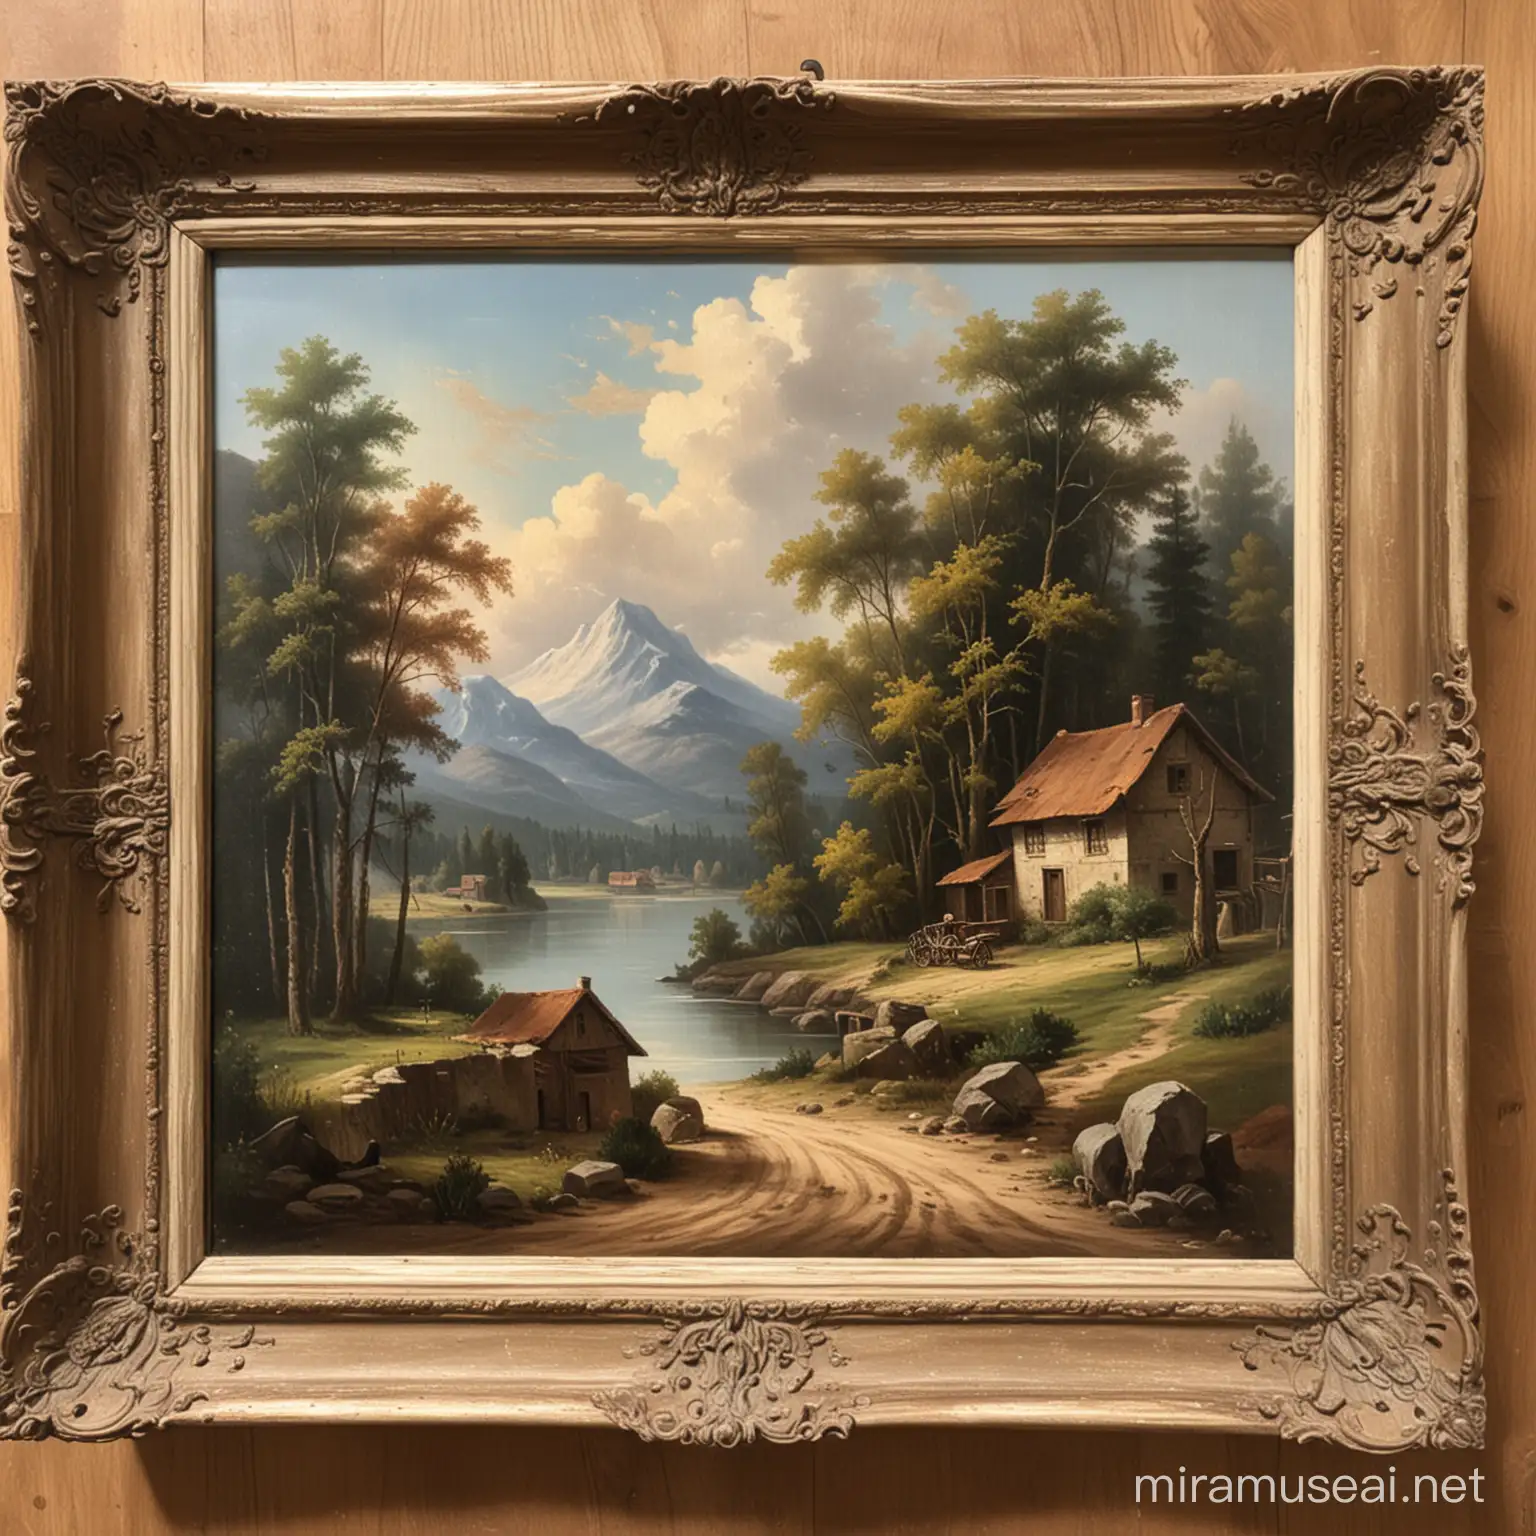 Classic Oil Painting of a Serene Countryside Landscape